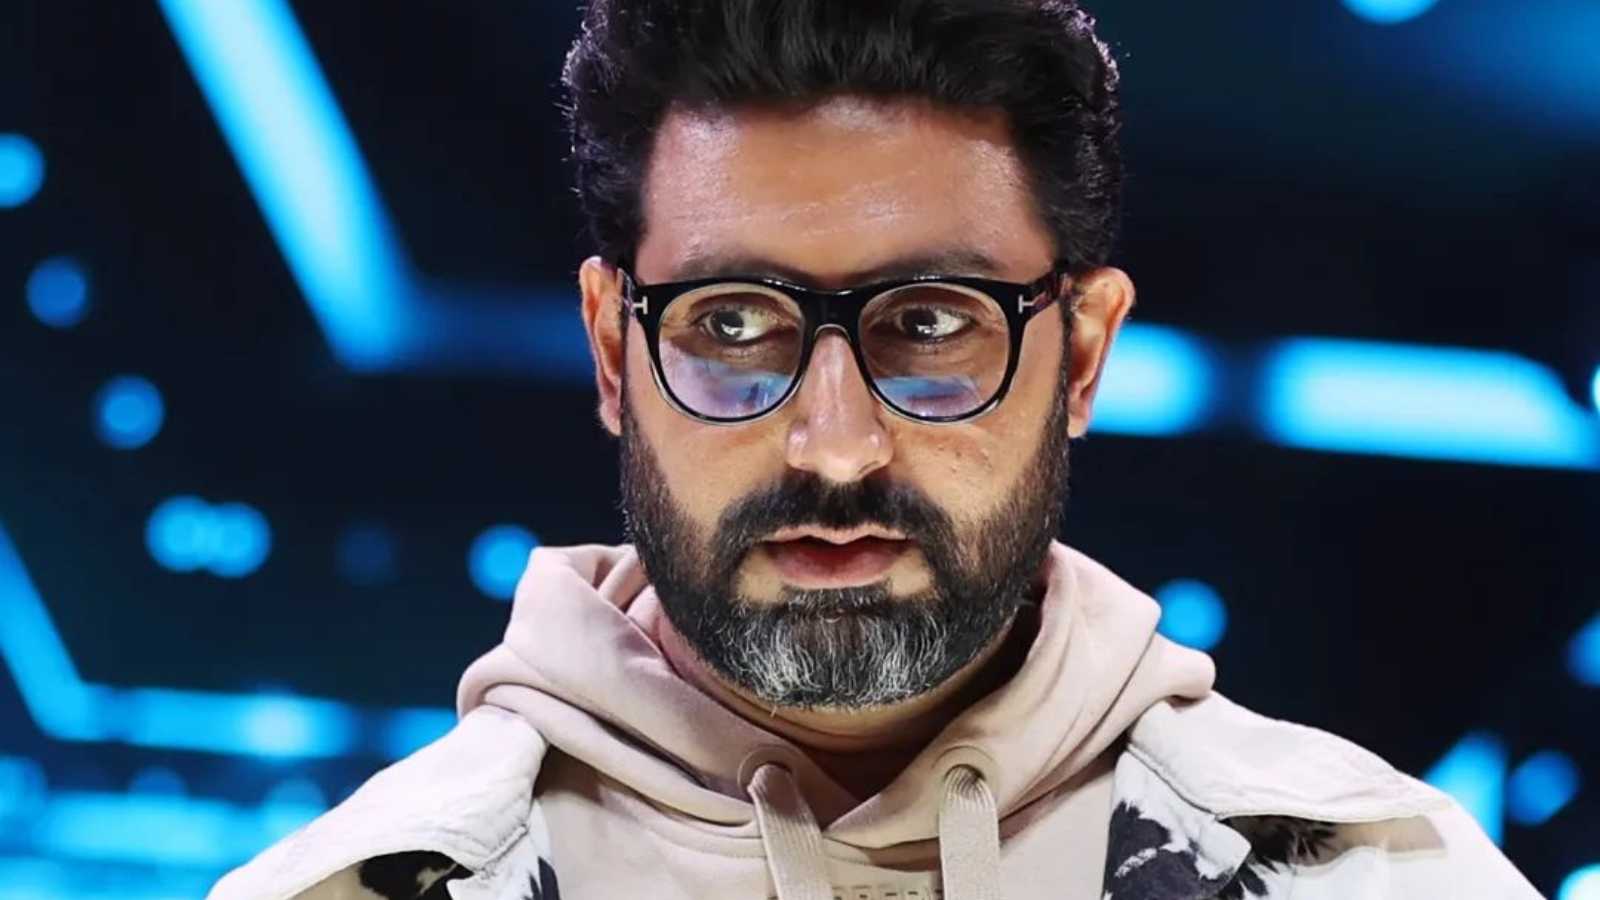 Abhishek Bachchan emphasises the importance of versatility and success if an actor wants 'remain employed' today